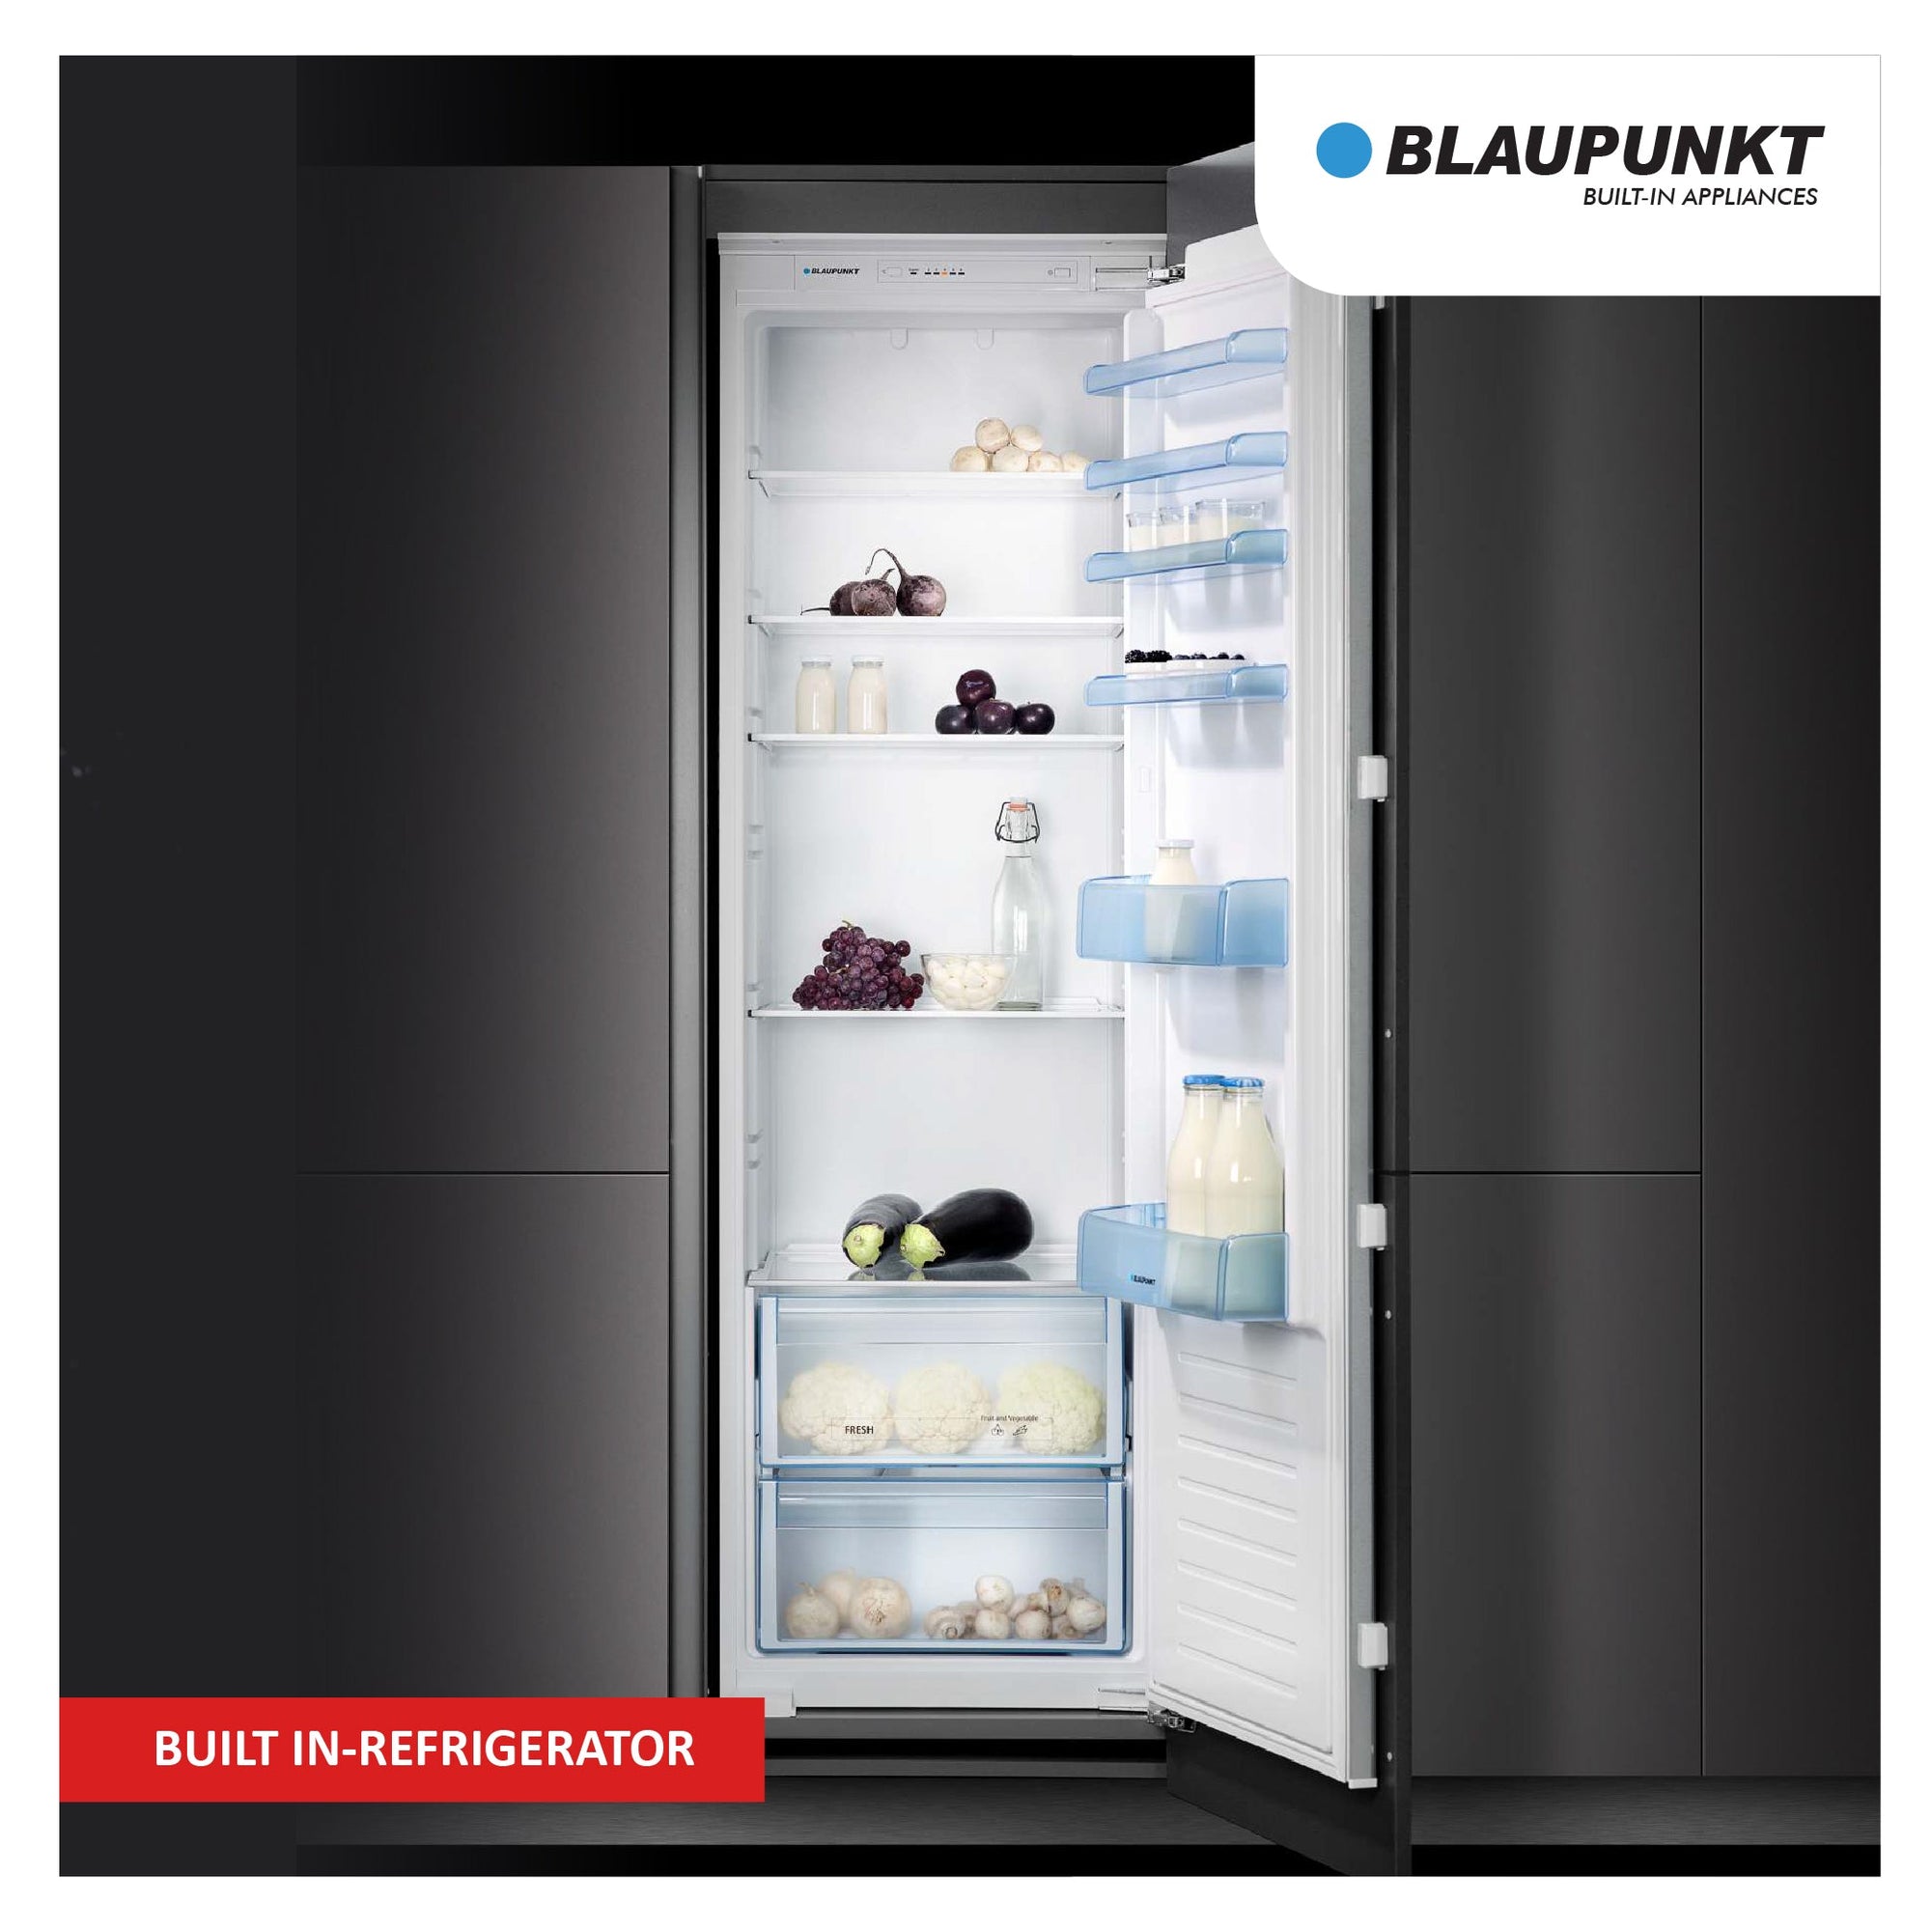 Blaupunkt built-in refrigerators by M. M. Noorbhoy & Co - High-quality seamless integration for efficient kitchen refrigeration.